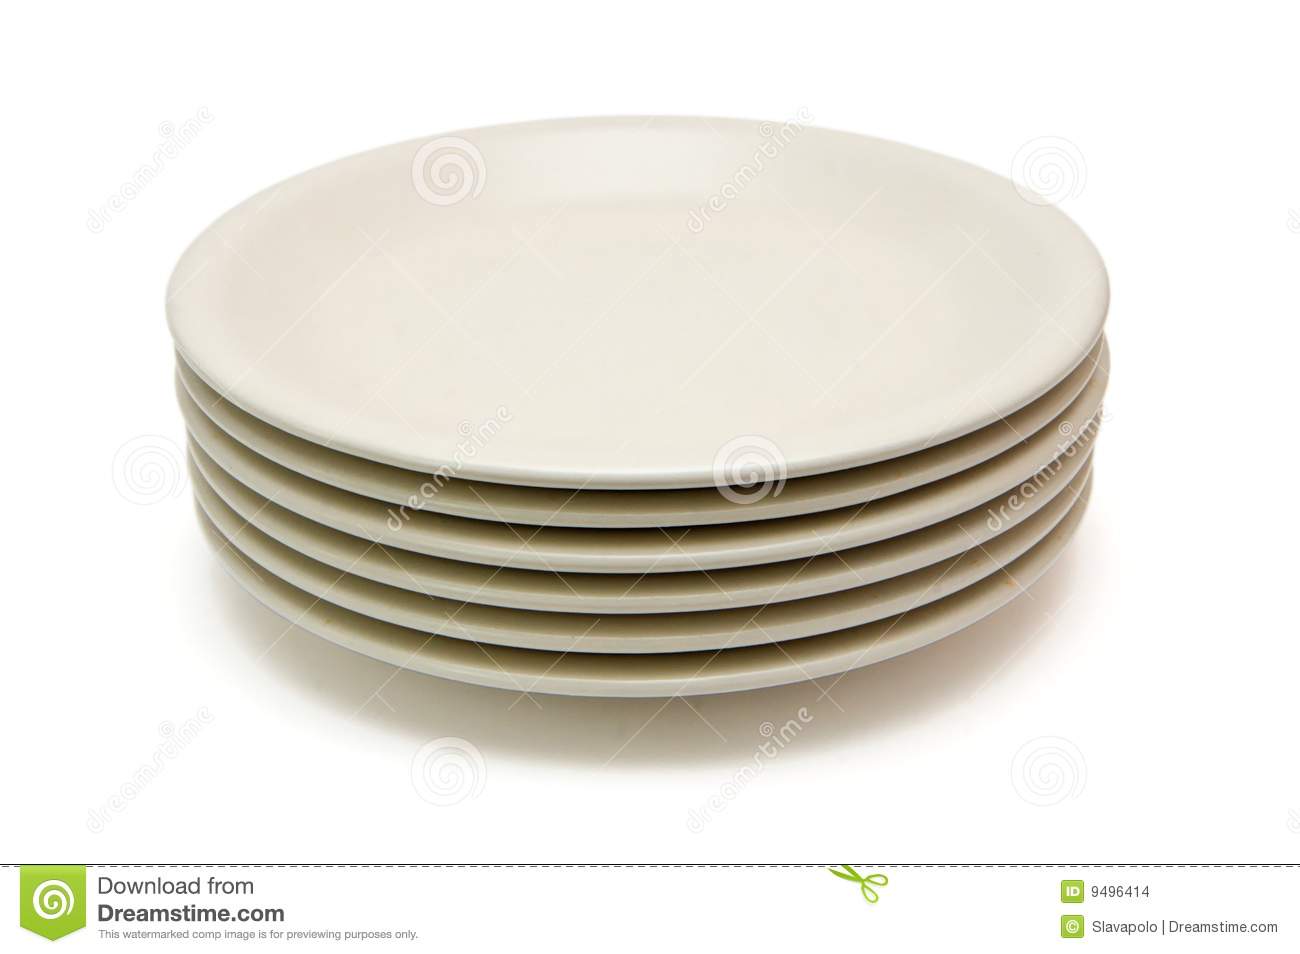 Stack Of Beige Dinner Plates Stock Images   Image  9496414